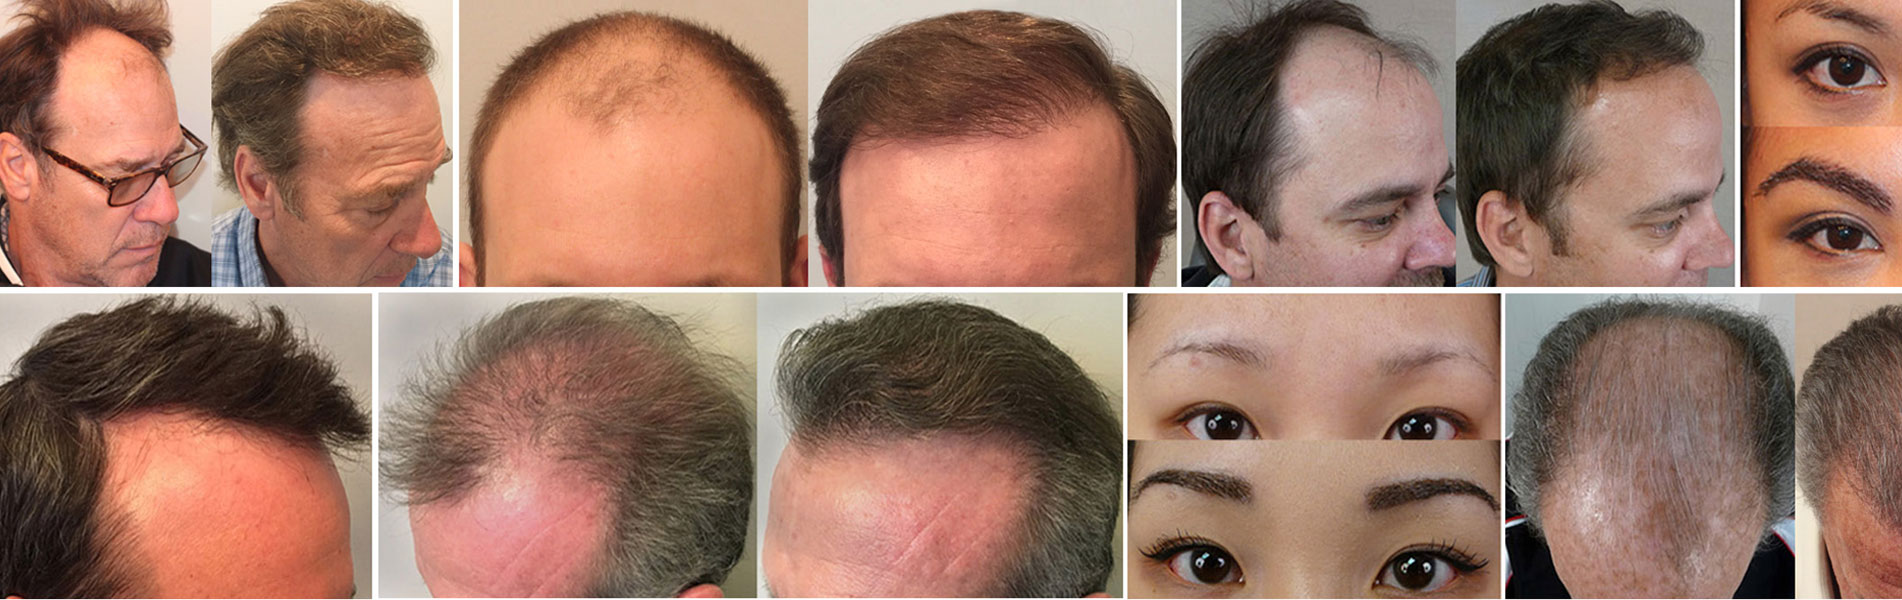 What Are The Important Factors For Hair Successful Hair Transplantation? -  Hair Sure